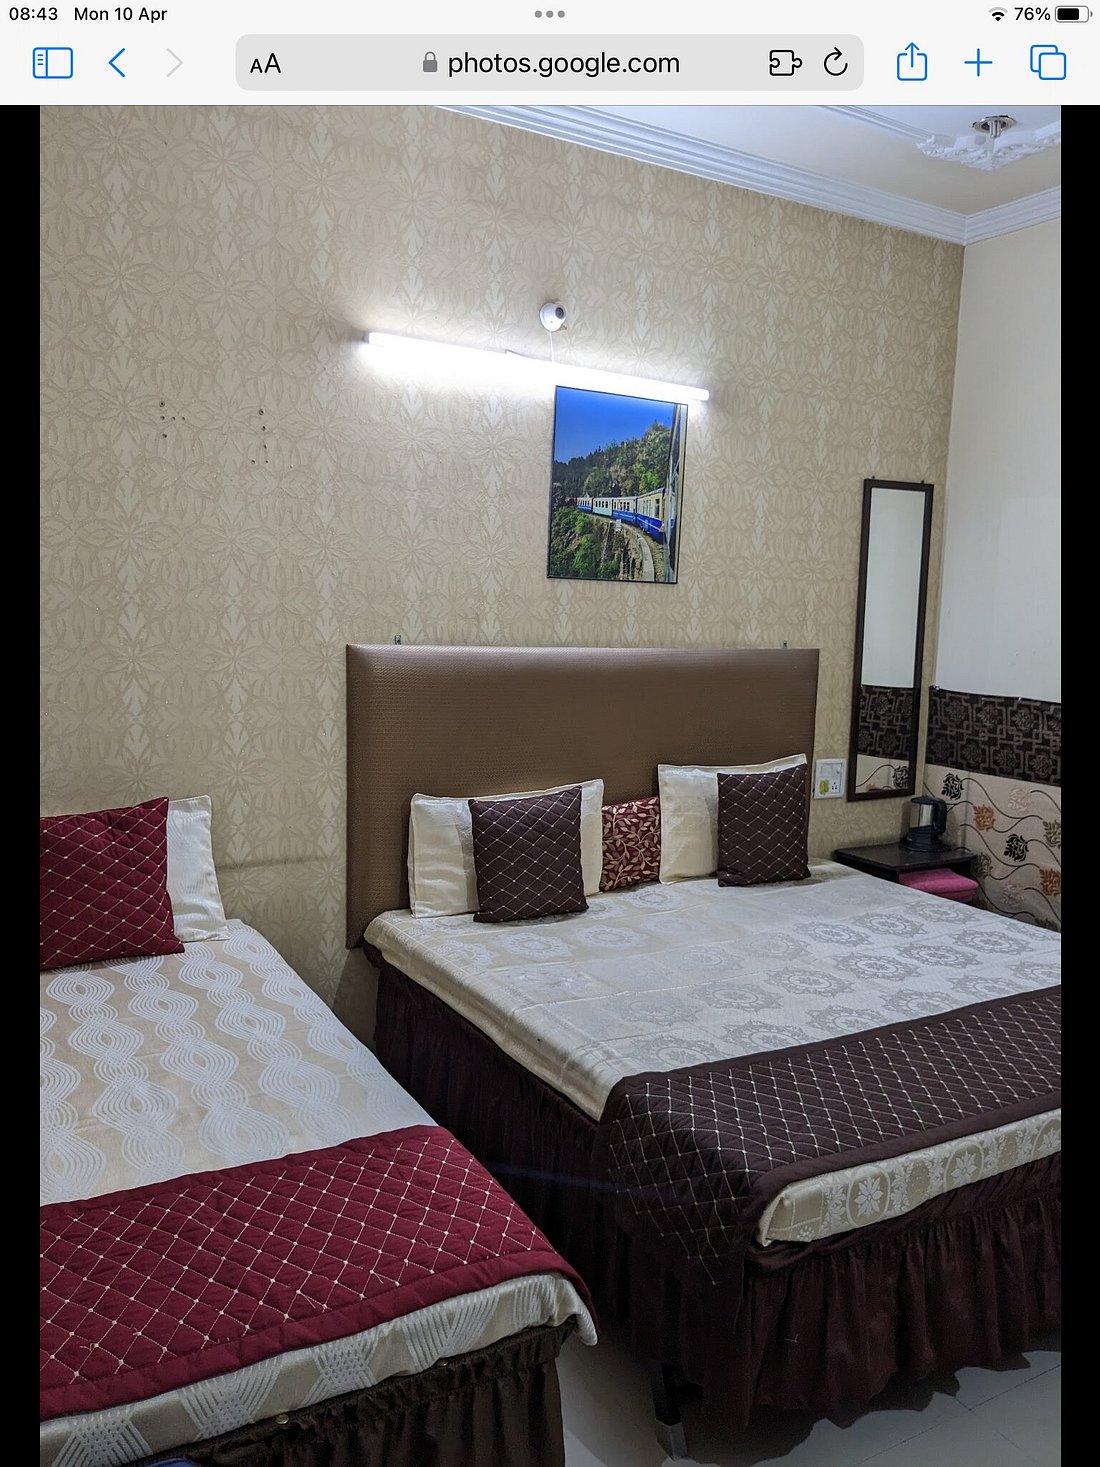 Holiday Home Guest House in Khudda Lahora,Chandigarh - Best Hotel  Reservations in Chandigarh - Justdial